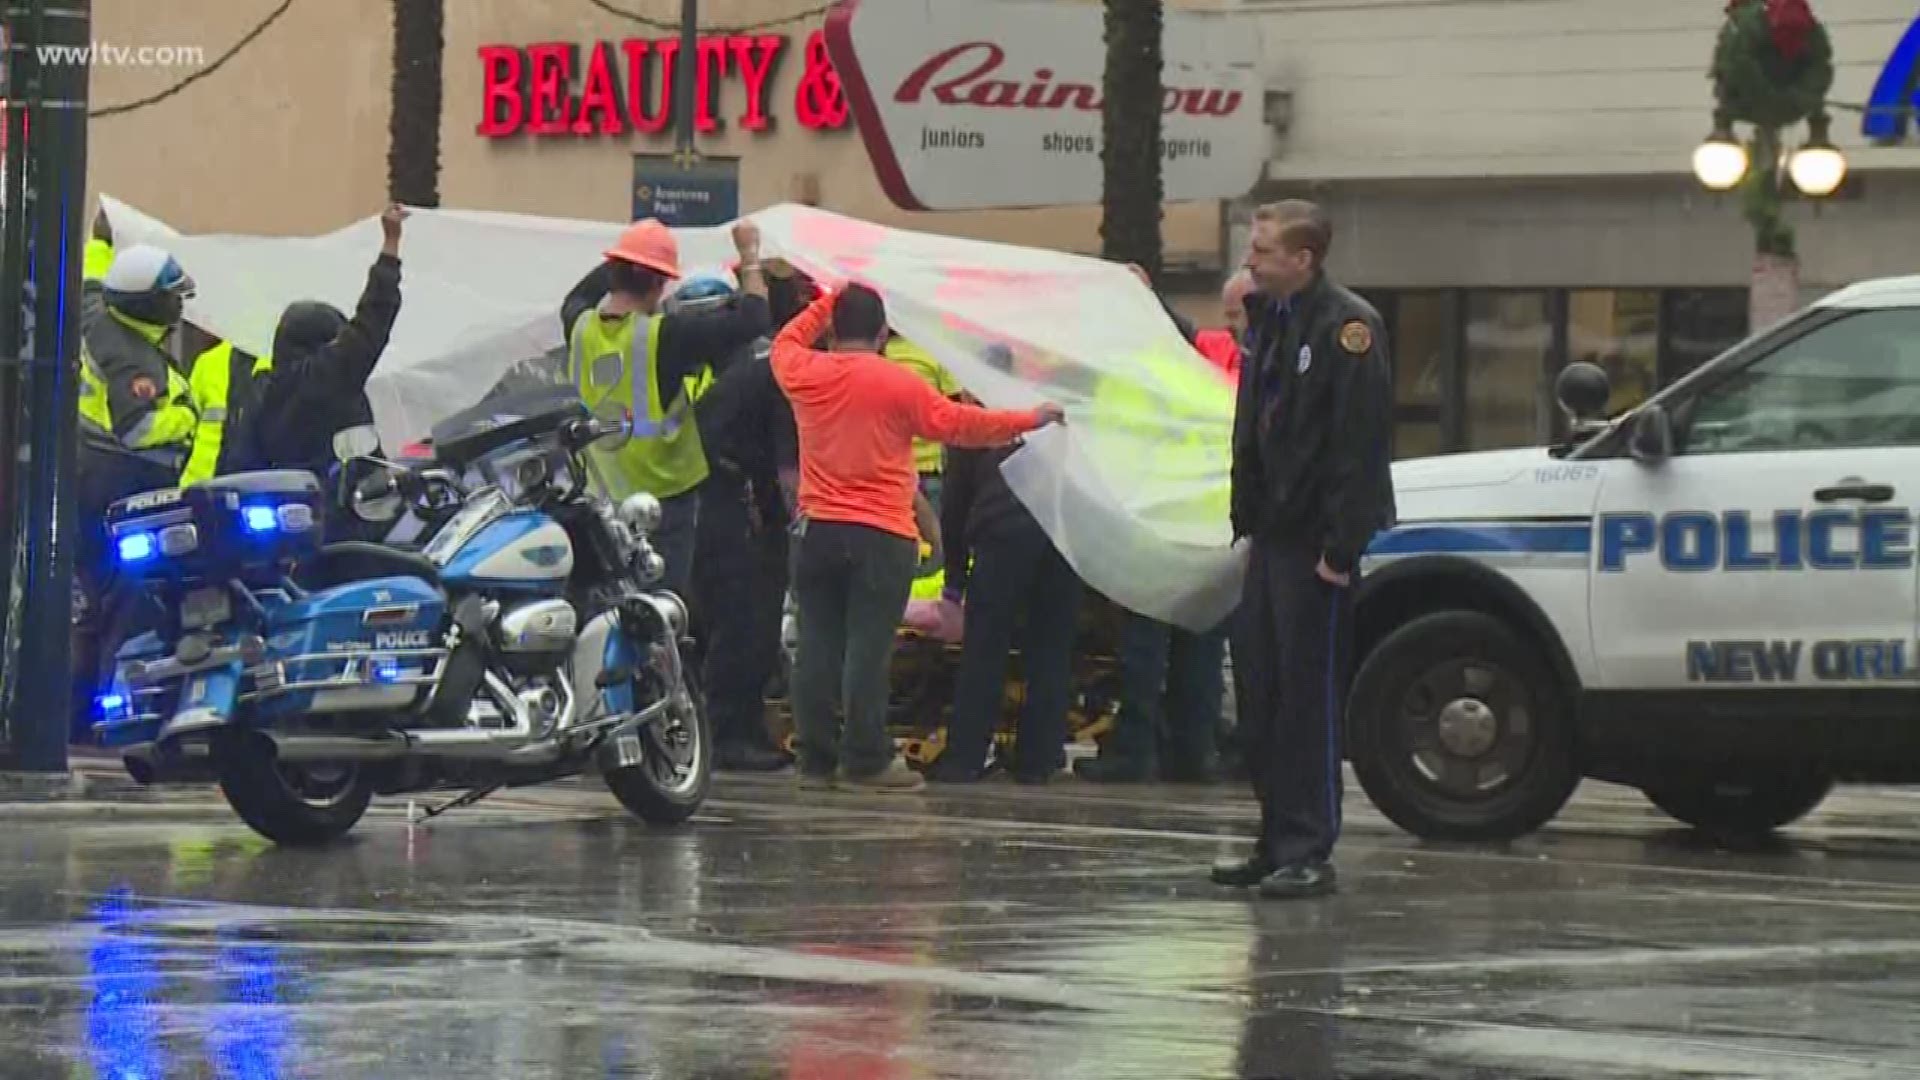 According to an eyewitness, several motorcycle officers seemed to be escorting some buses along the street when the injured officer tried to stop his bike and was hopping on his leg trying to make the stop when the motorcycle fell on his leg.